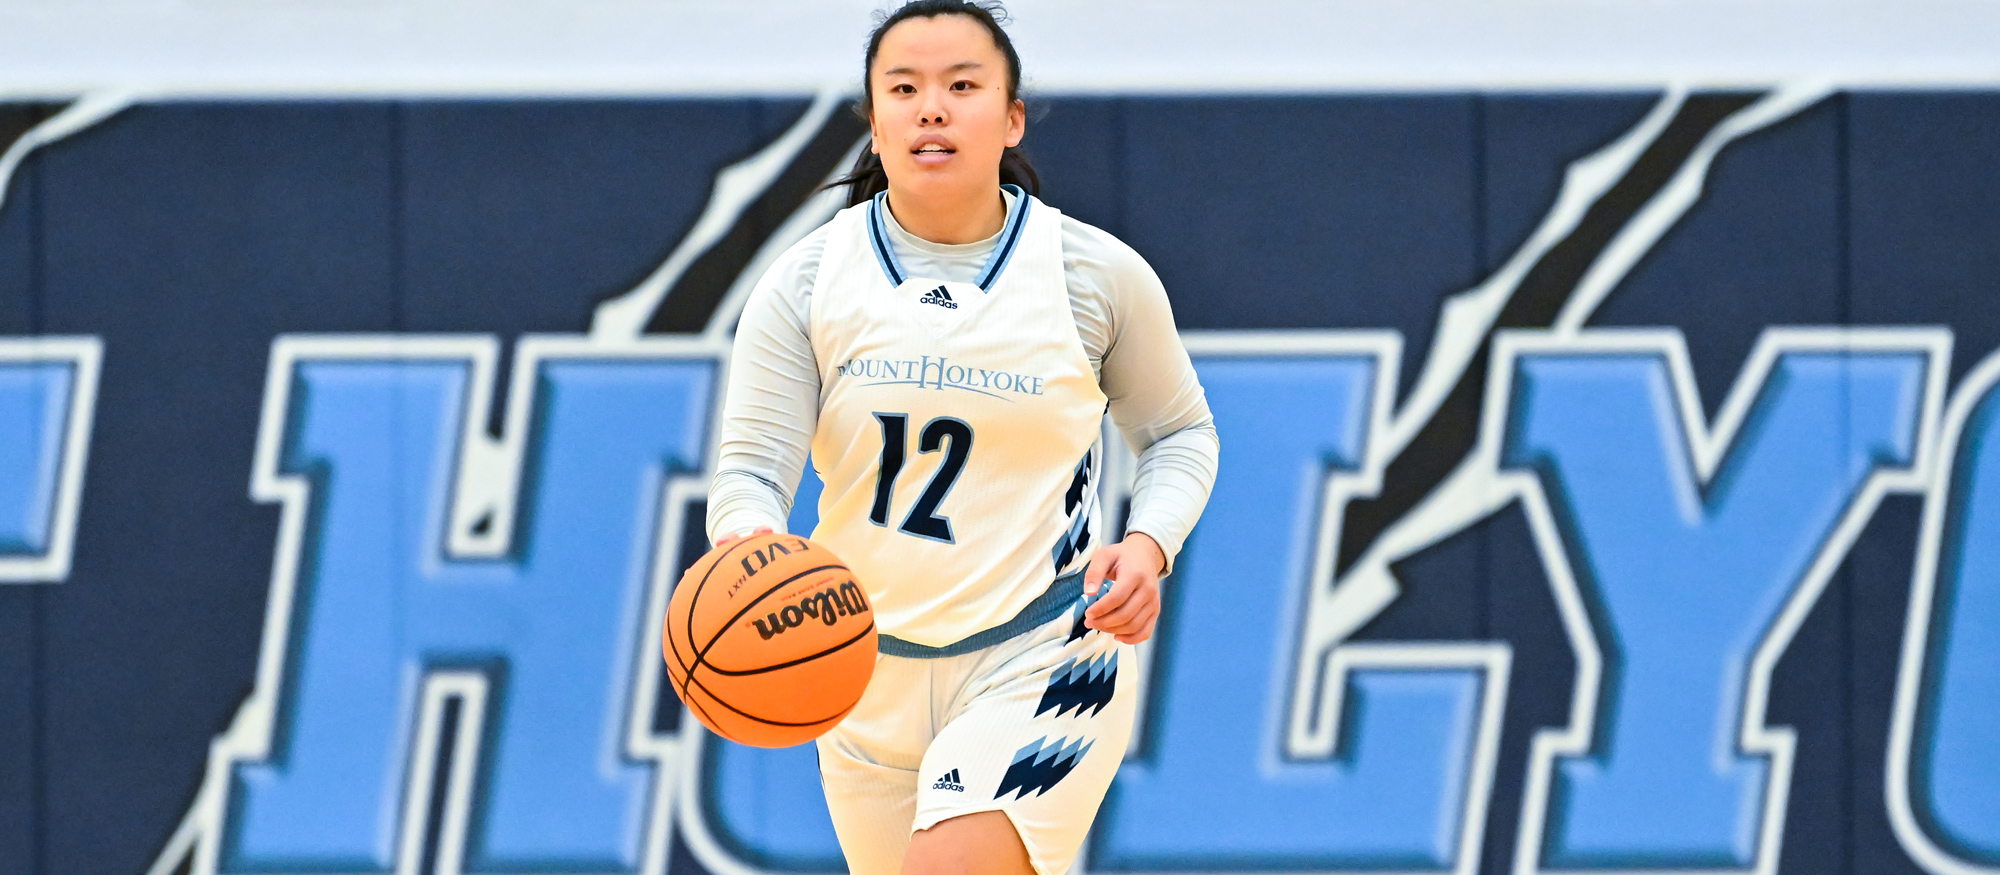 Libby Harris led Mount Holyoke with eight points in the Lyons' loss at Emerson on Feb. 3, 2024. (RJB Sports file photo)